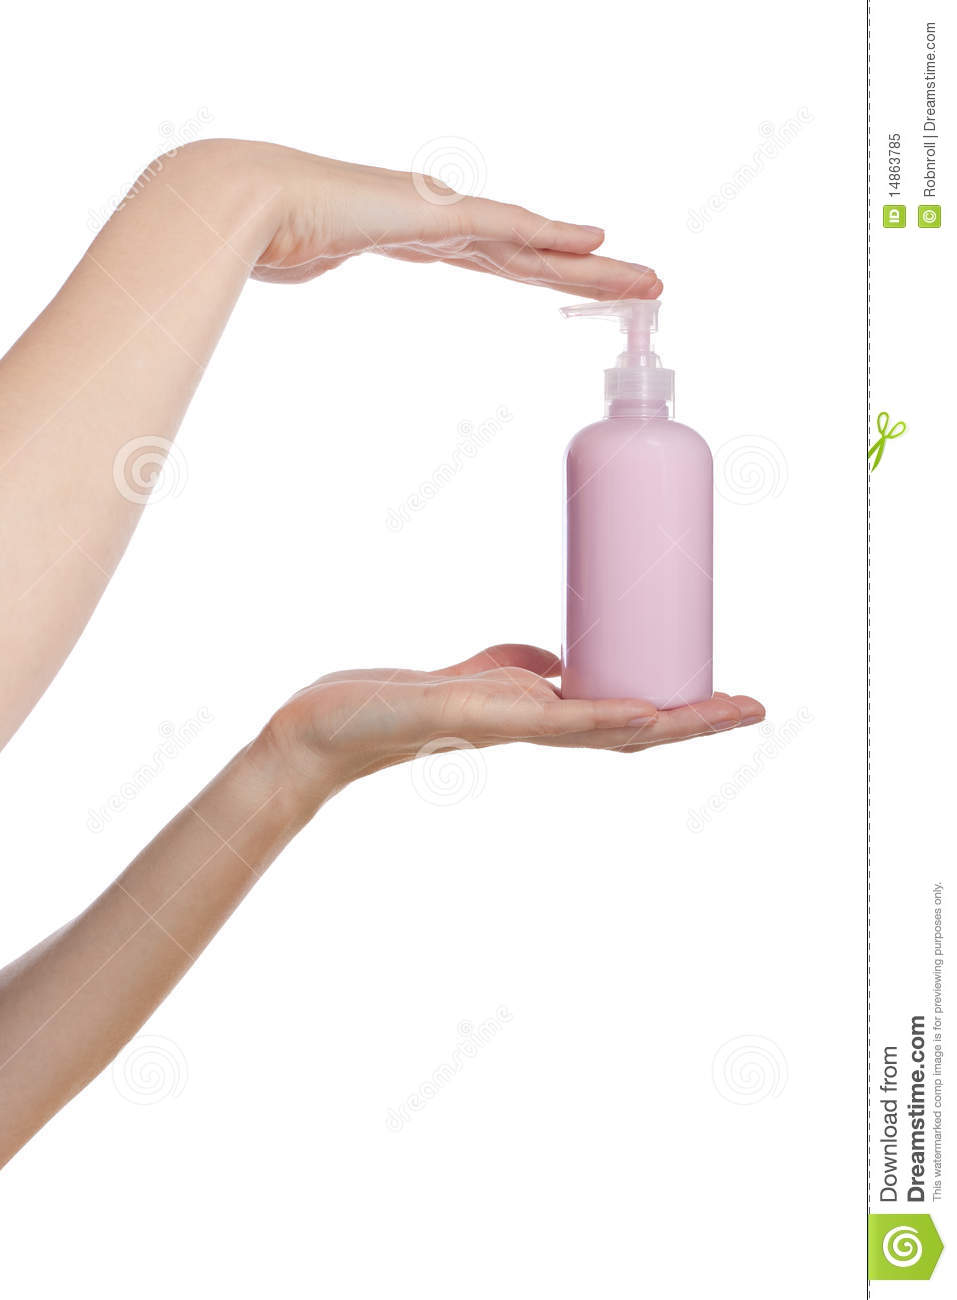 Female Hands Holding A Body Lotion Dispenser Royalty Free Stock Photo    